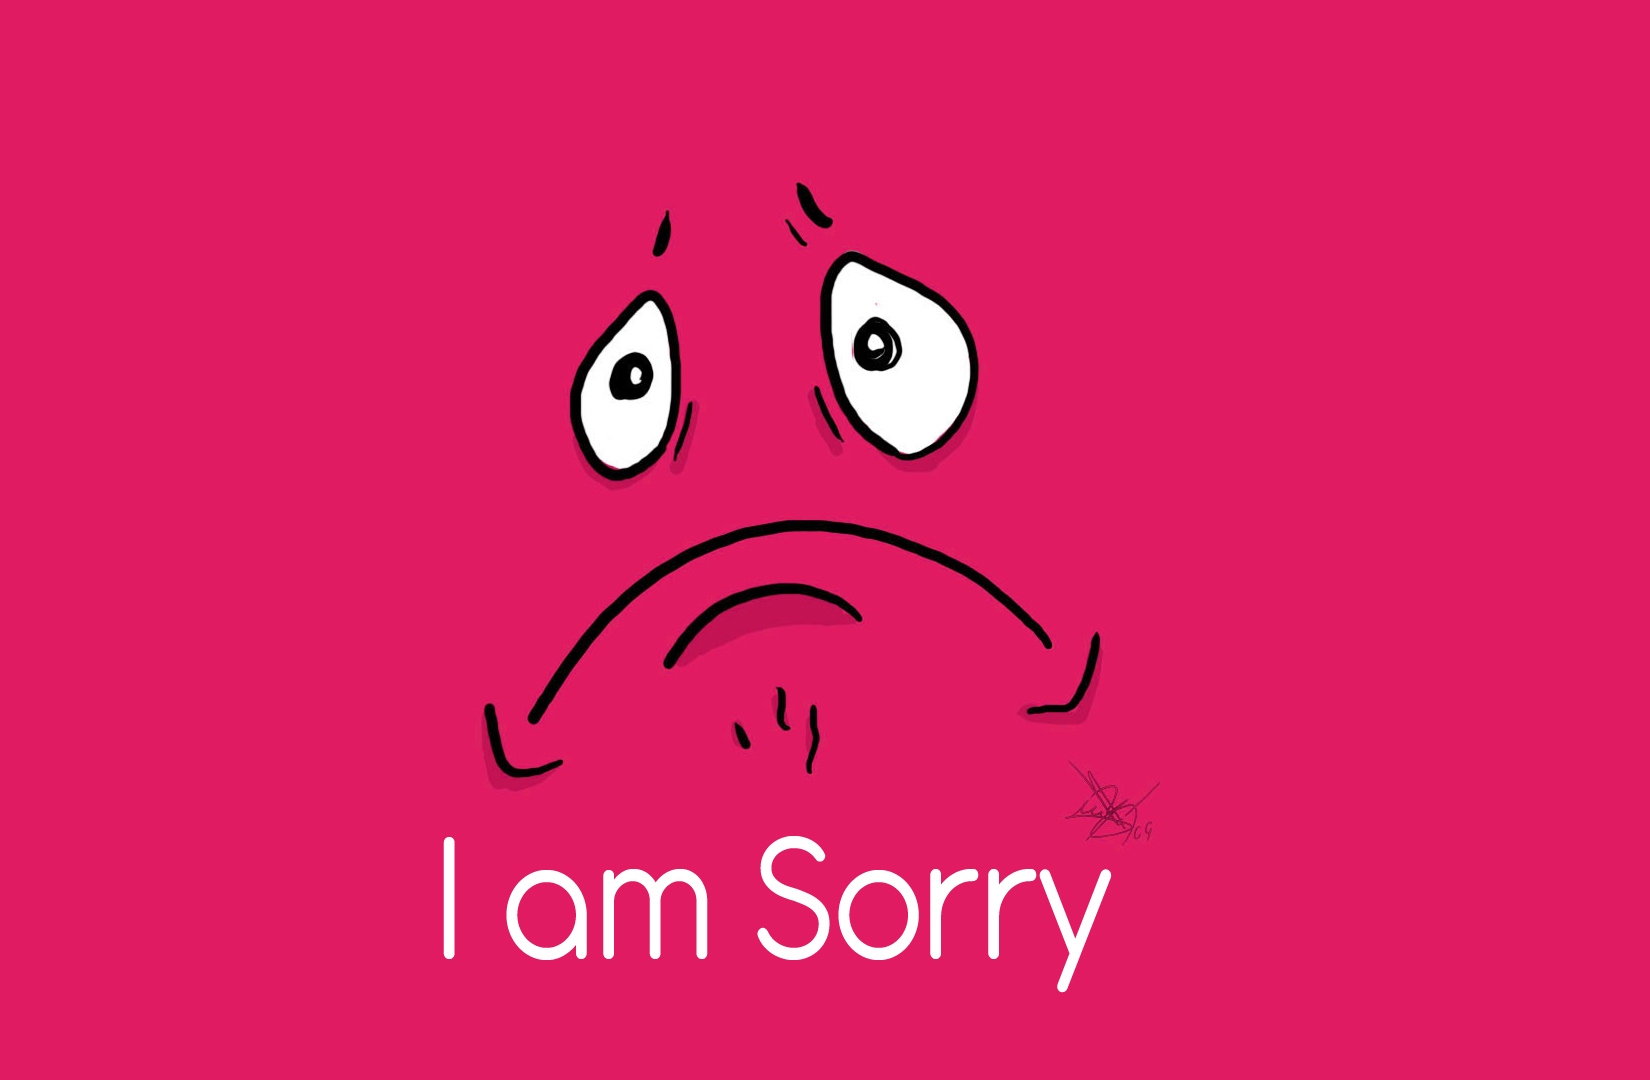 I am Sorry Images Wallpaper for Whatsapp